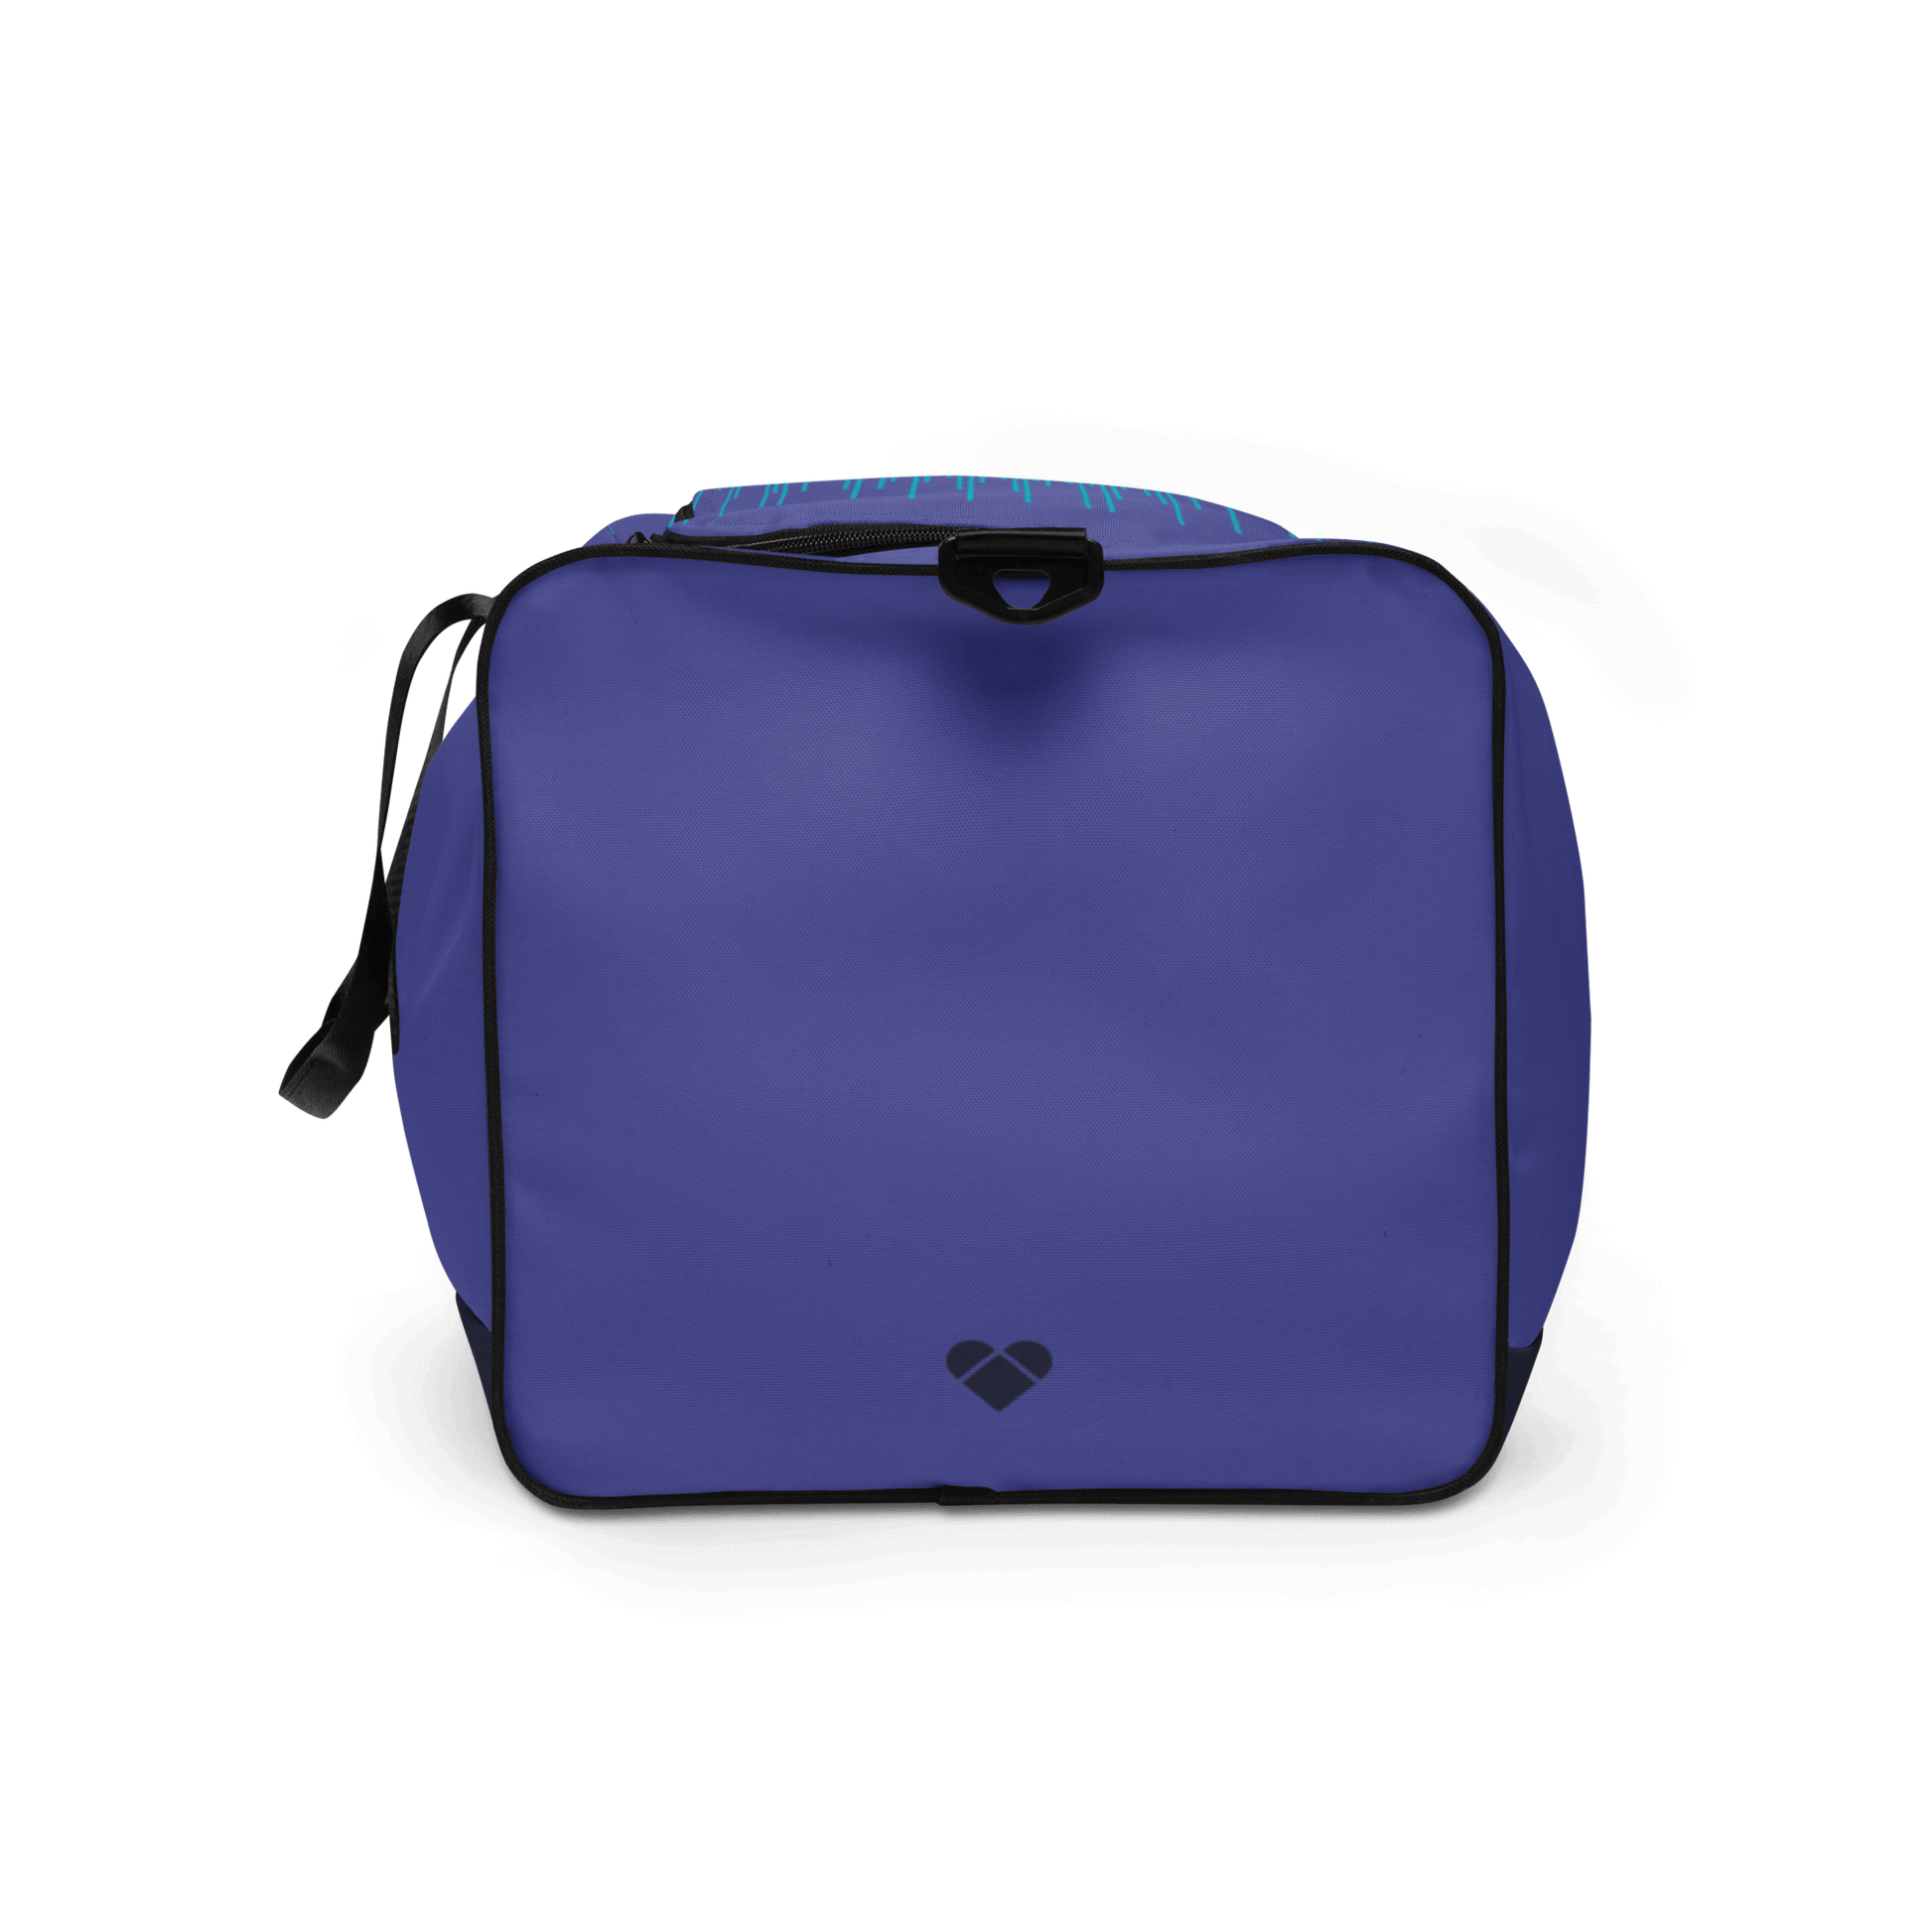 Stylish Mint and Periwinkle Duffle Bag from CRiZ AMOR